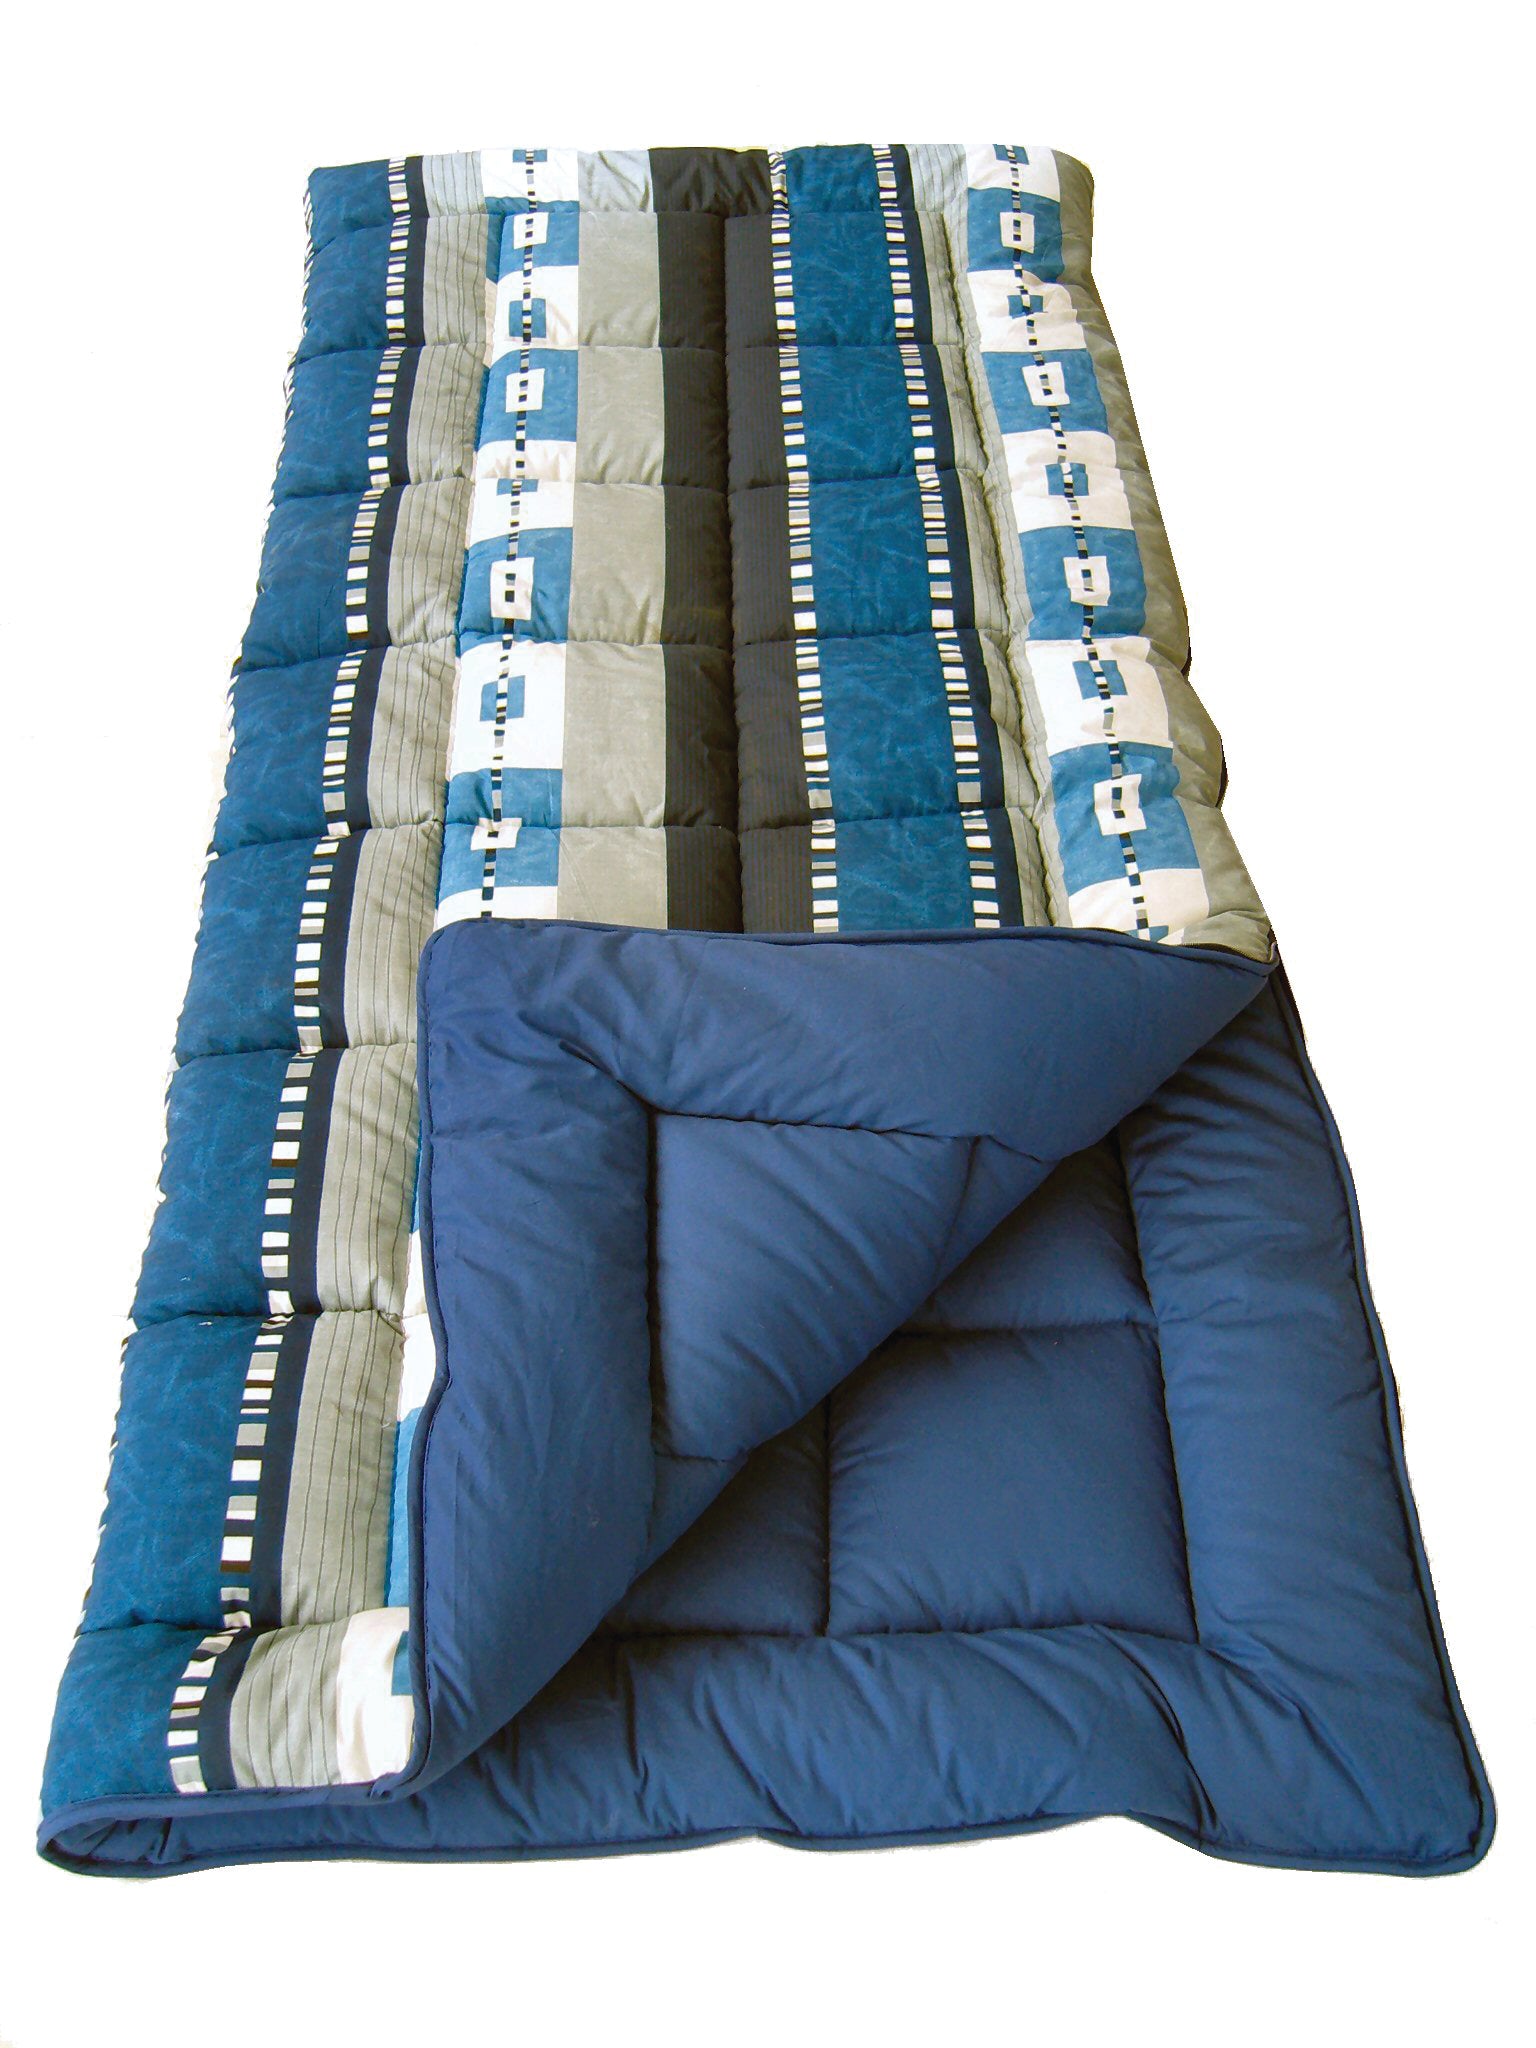 Expression - Super Deluxe King Size Sleeping Bag